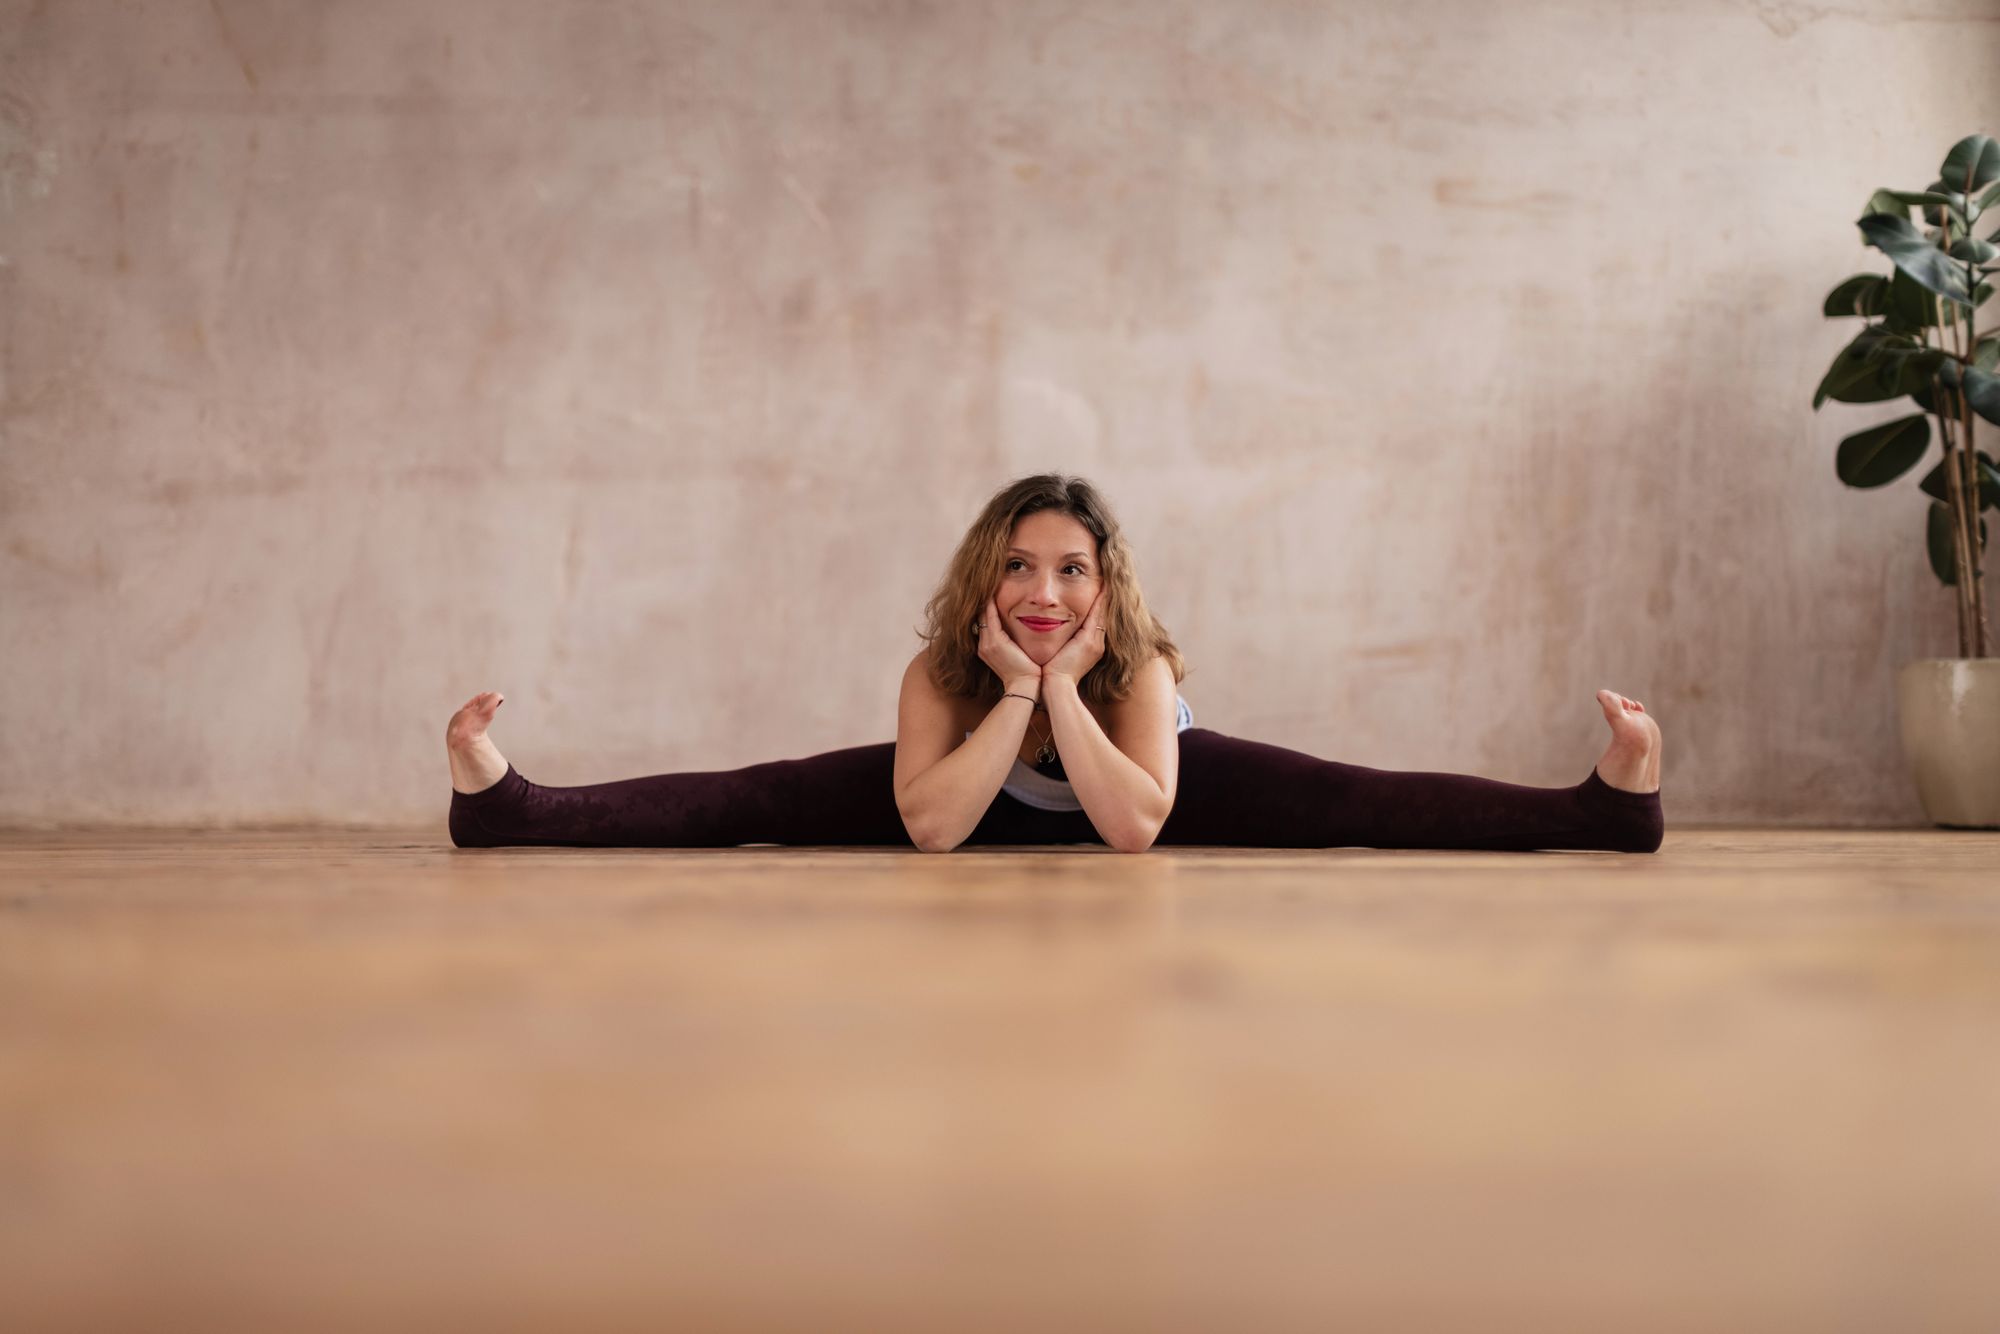 Connect to the Joy Within - Yoga Origins